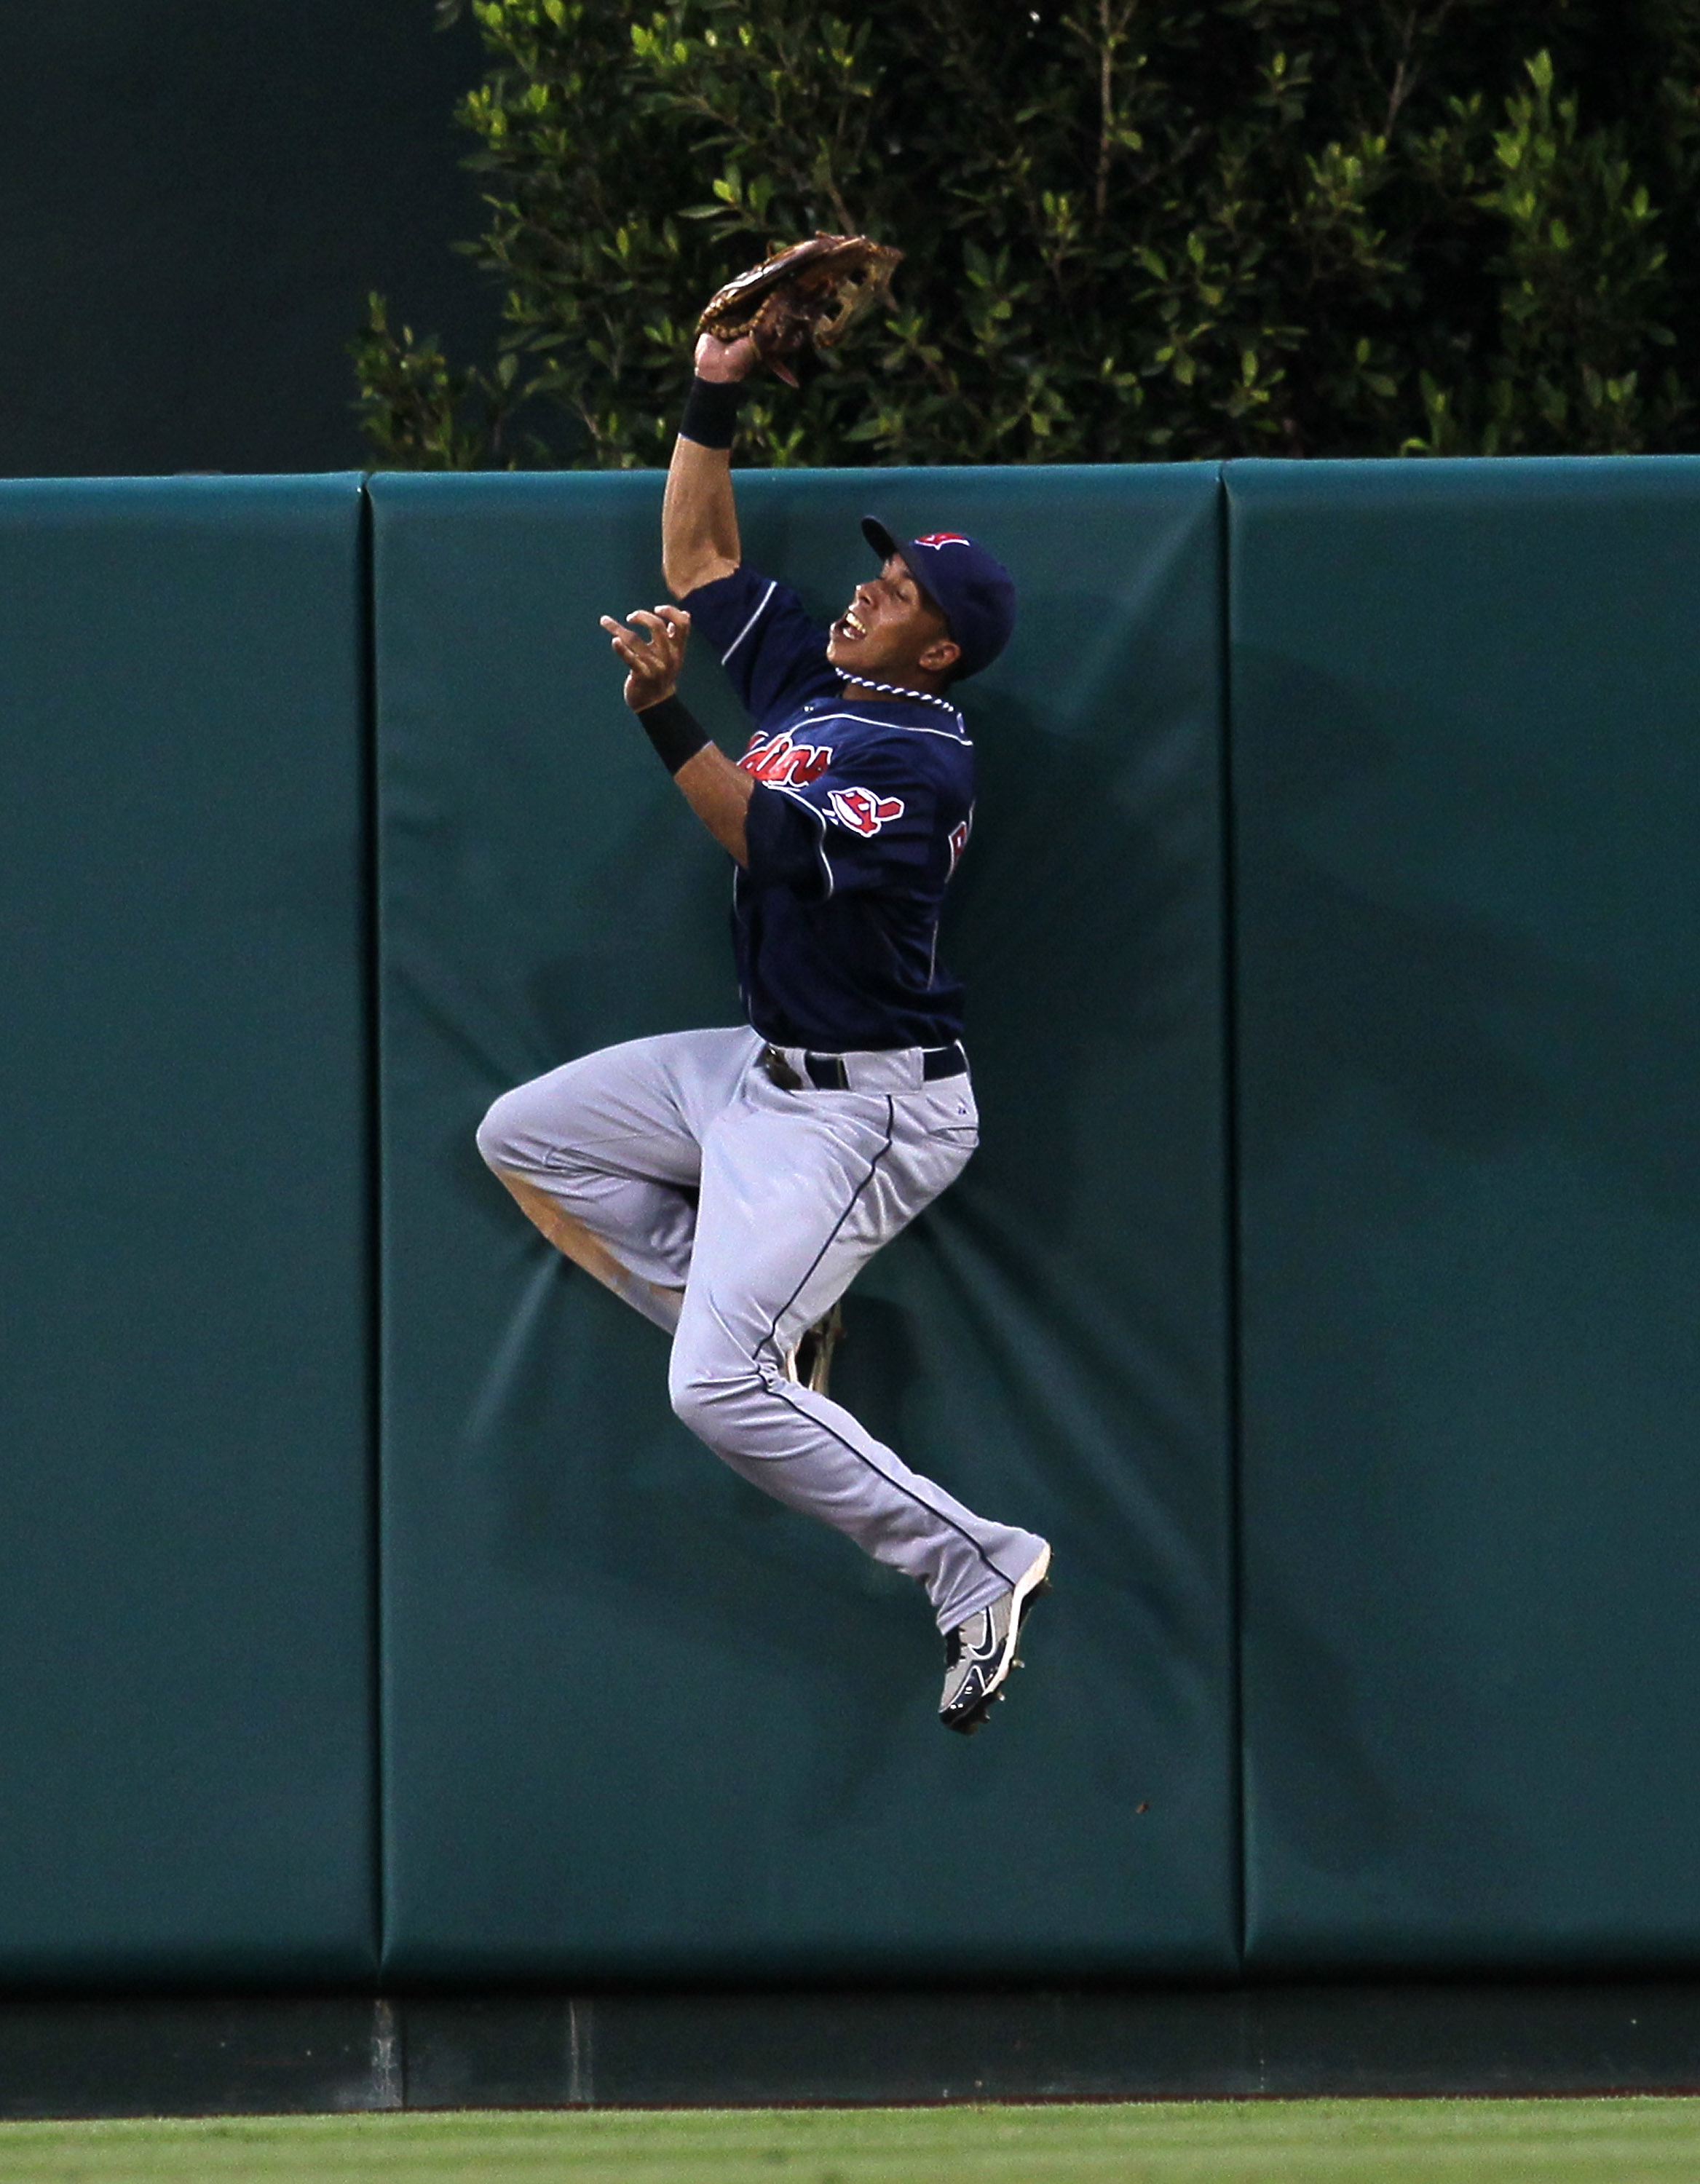 ANAHEIM, CA - SEPTEMBER 08:  Center fielder Michael Brantley #23 of the Cleveland Indians jumps to catch a ball at the wall and deny a bid for a walk off home run by Juan Rivera #20 of the Los Angeles Angels of Anaheim in the tenth inning on September 8,